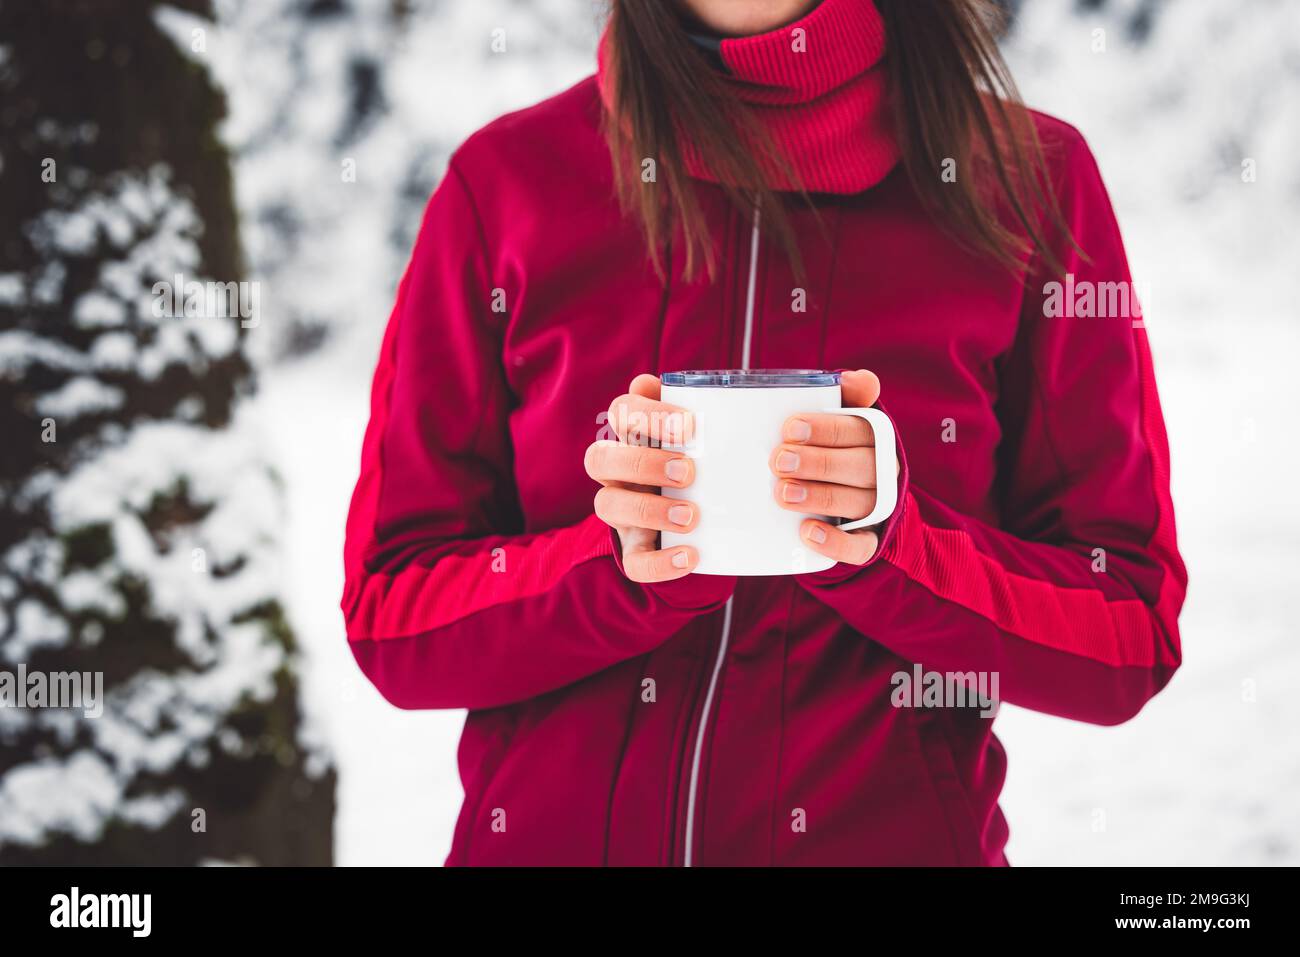 Unrecognizable woman in red winter jacket holding a tea cup while standing in a snowy winter forest Stock Photo